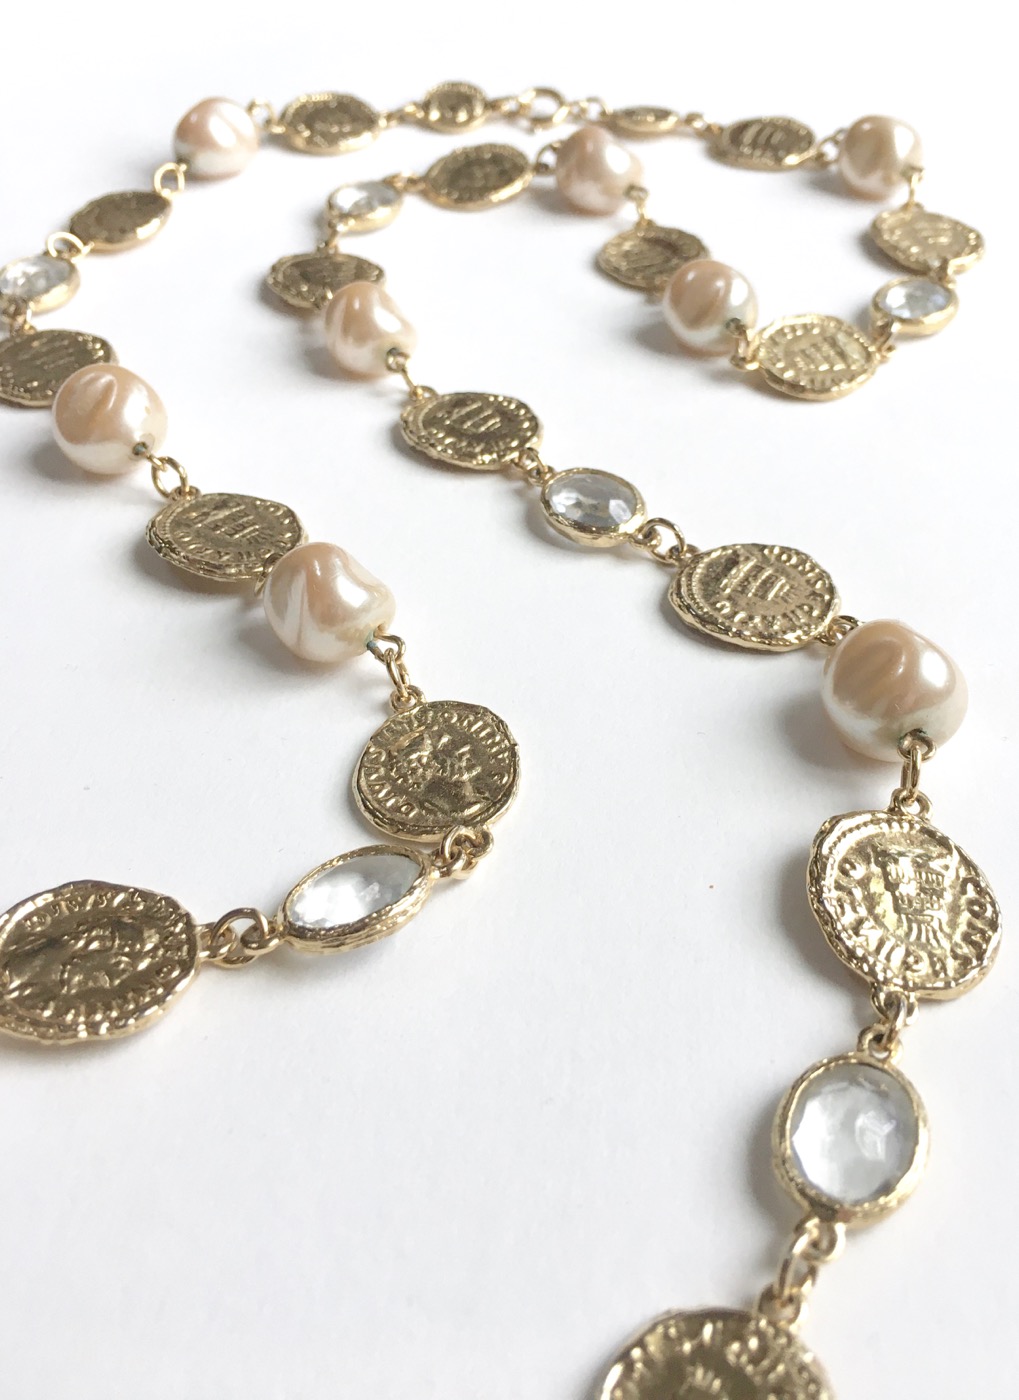 VINTAGE GIVENCHY 3 STRAND FAUX PEARL NECKLACE sold at auction on